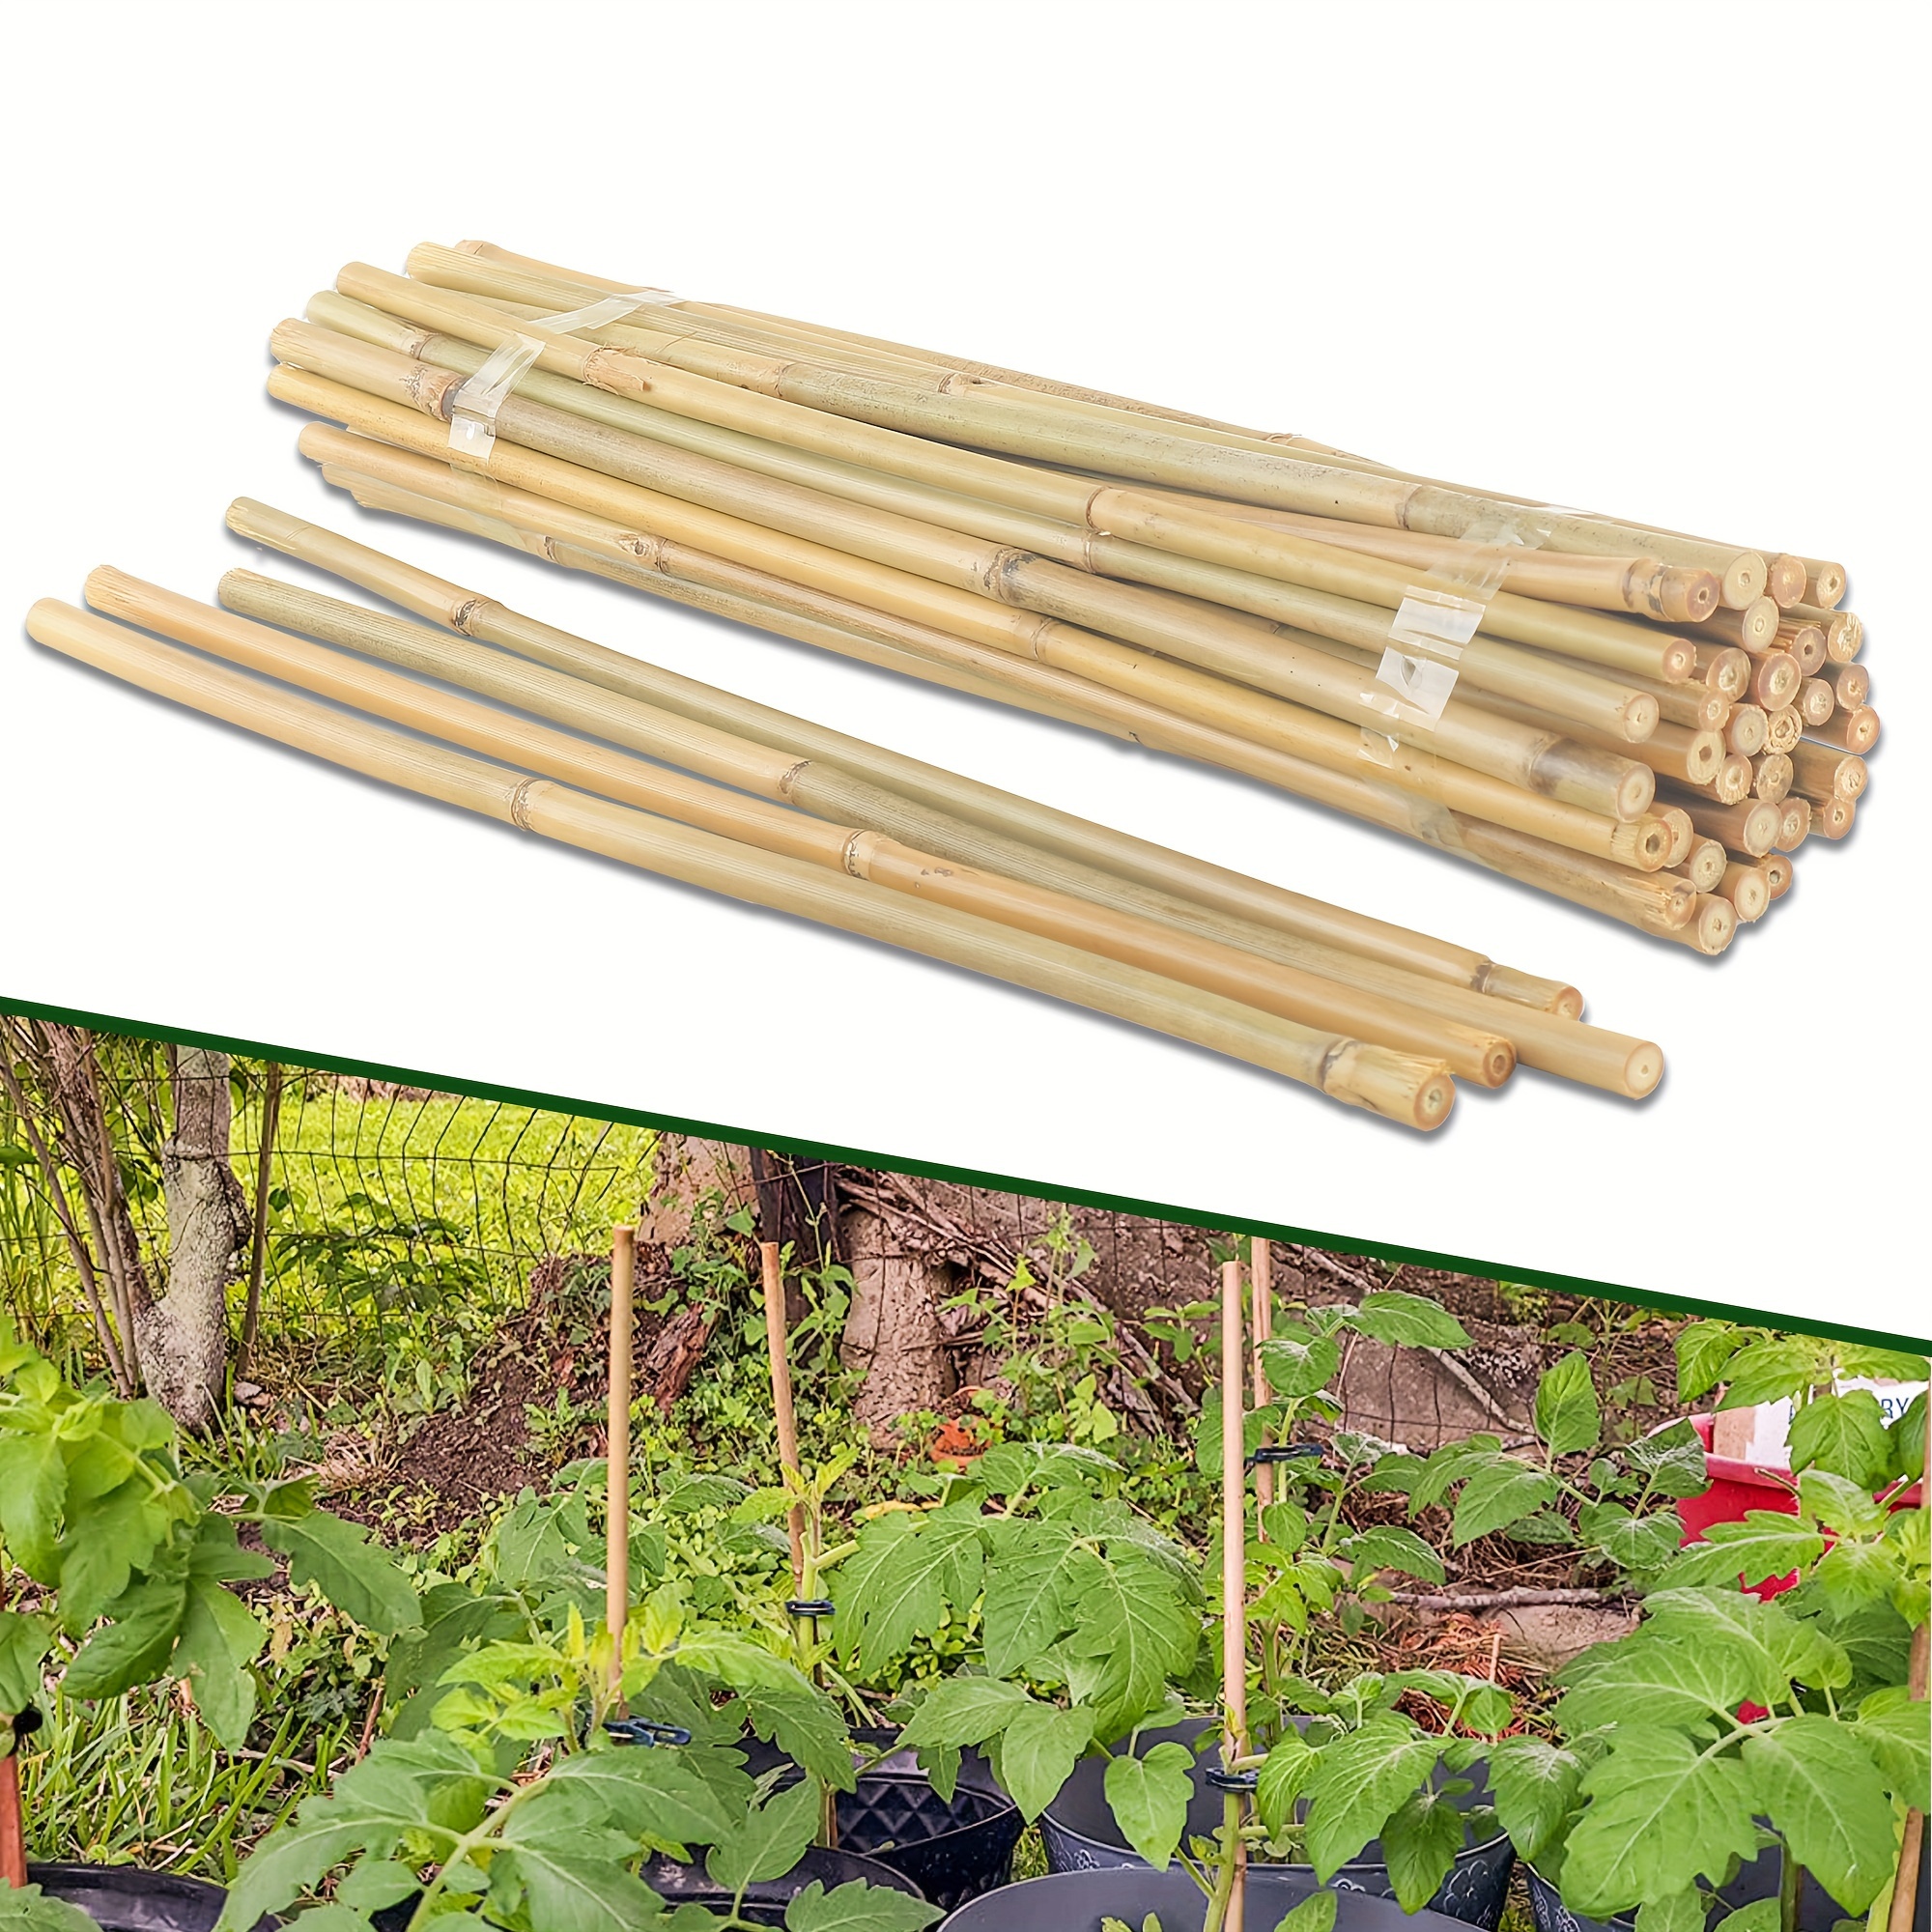 

100pcs Bamboo Plant Stakes, Suitable For Indoor And Outdoor Plants, 18 Inch Bamboo Stick Garden Support Stakes, Suitable For Tomato, Vegetable, Bean Tree, Potted Climbing Plants